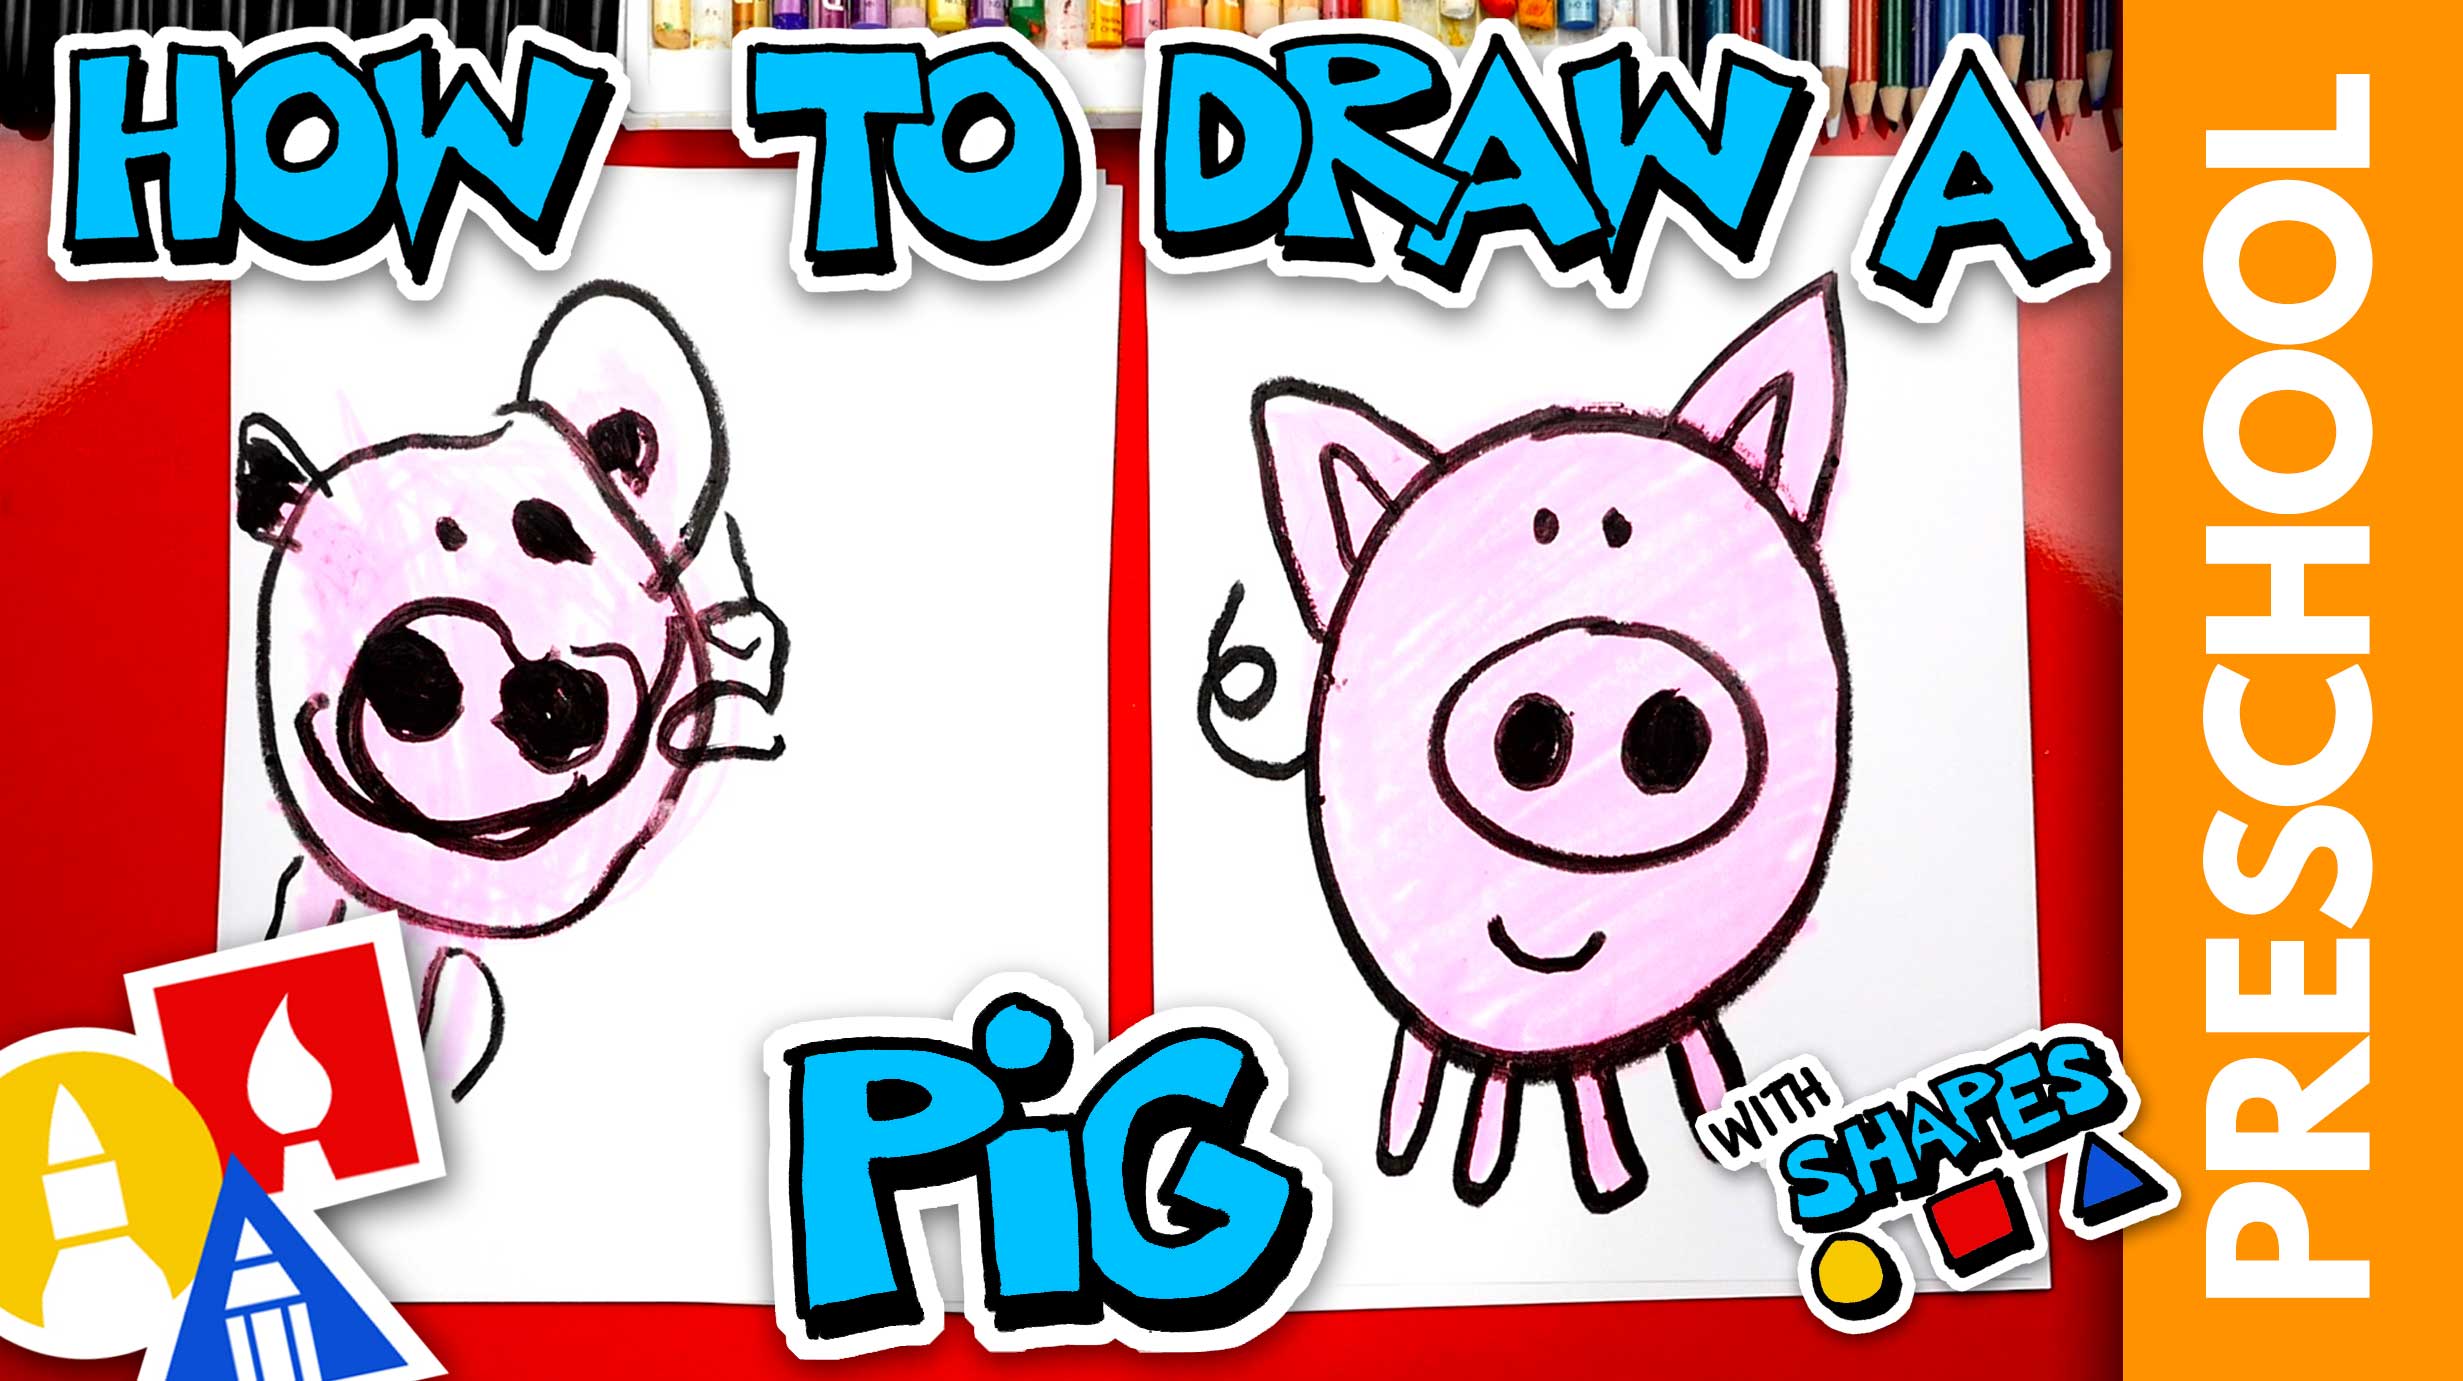 How To Draw Any Animal From A Square, A Triangle And A Circle | Bored Panda